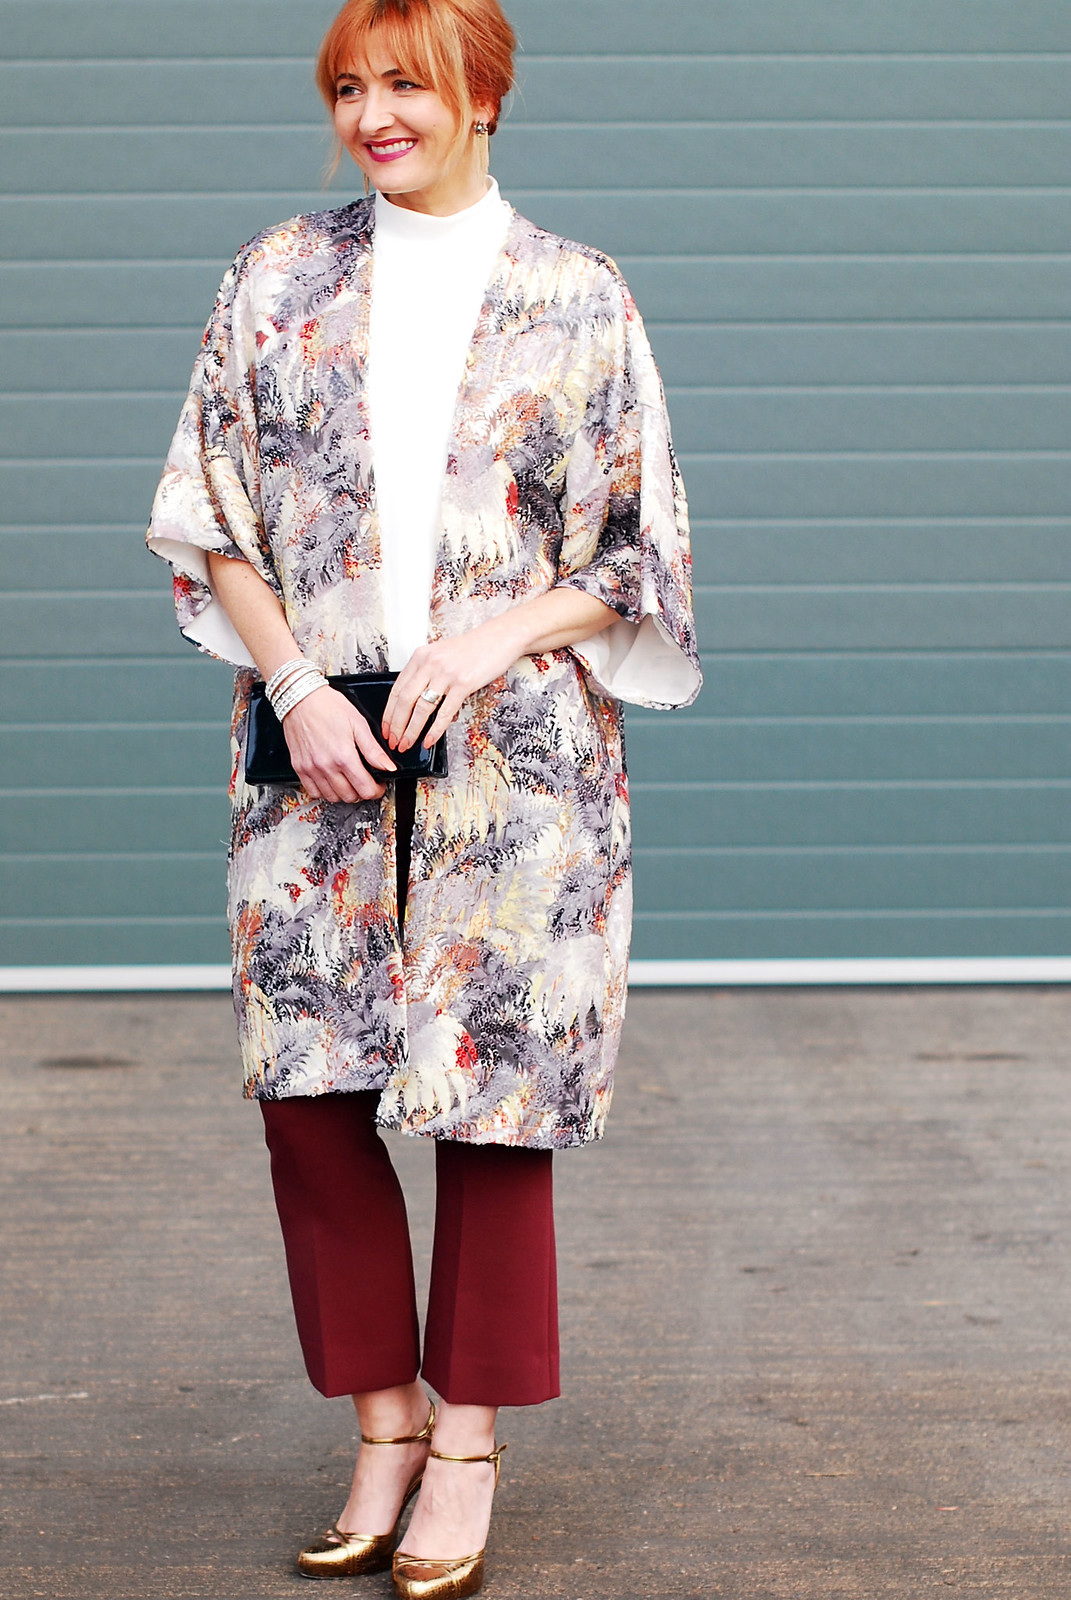 Christmas party outfit sequinned palm print kimono burgundy cropped flares high neck white top bronze, gold high heels | Not Dressed As Lamb, over 40 style